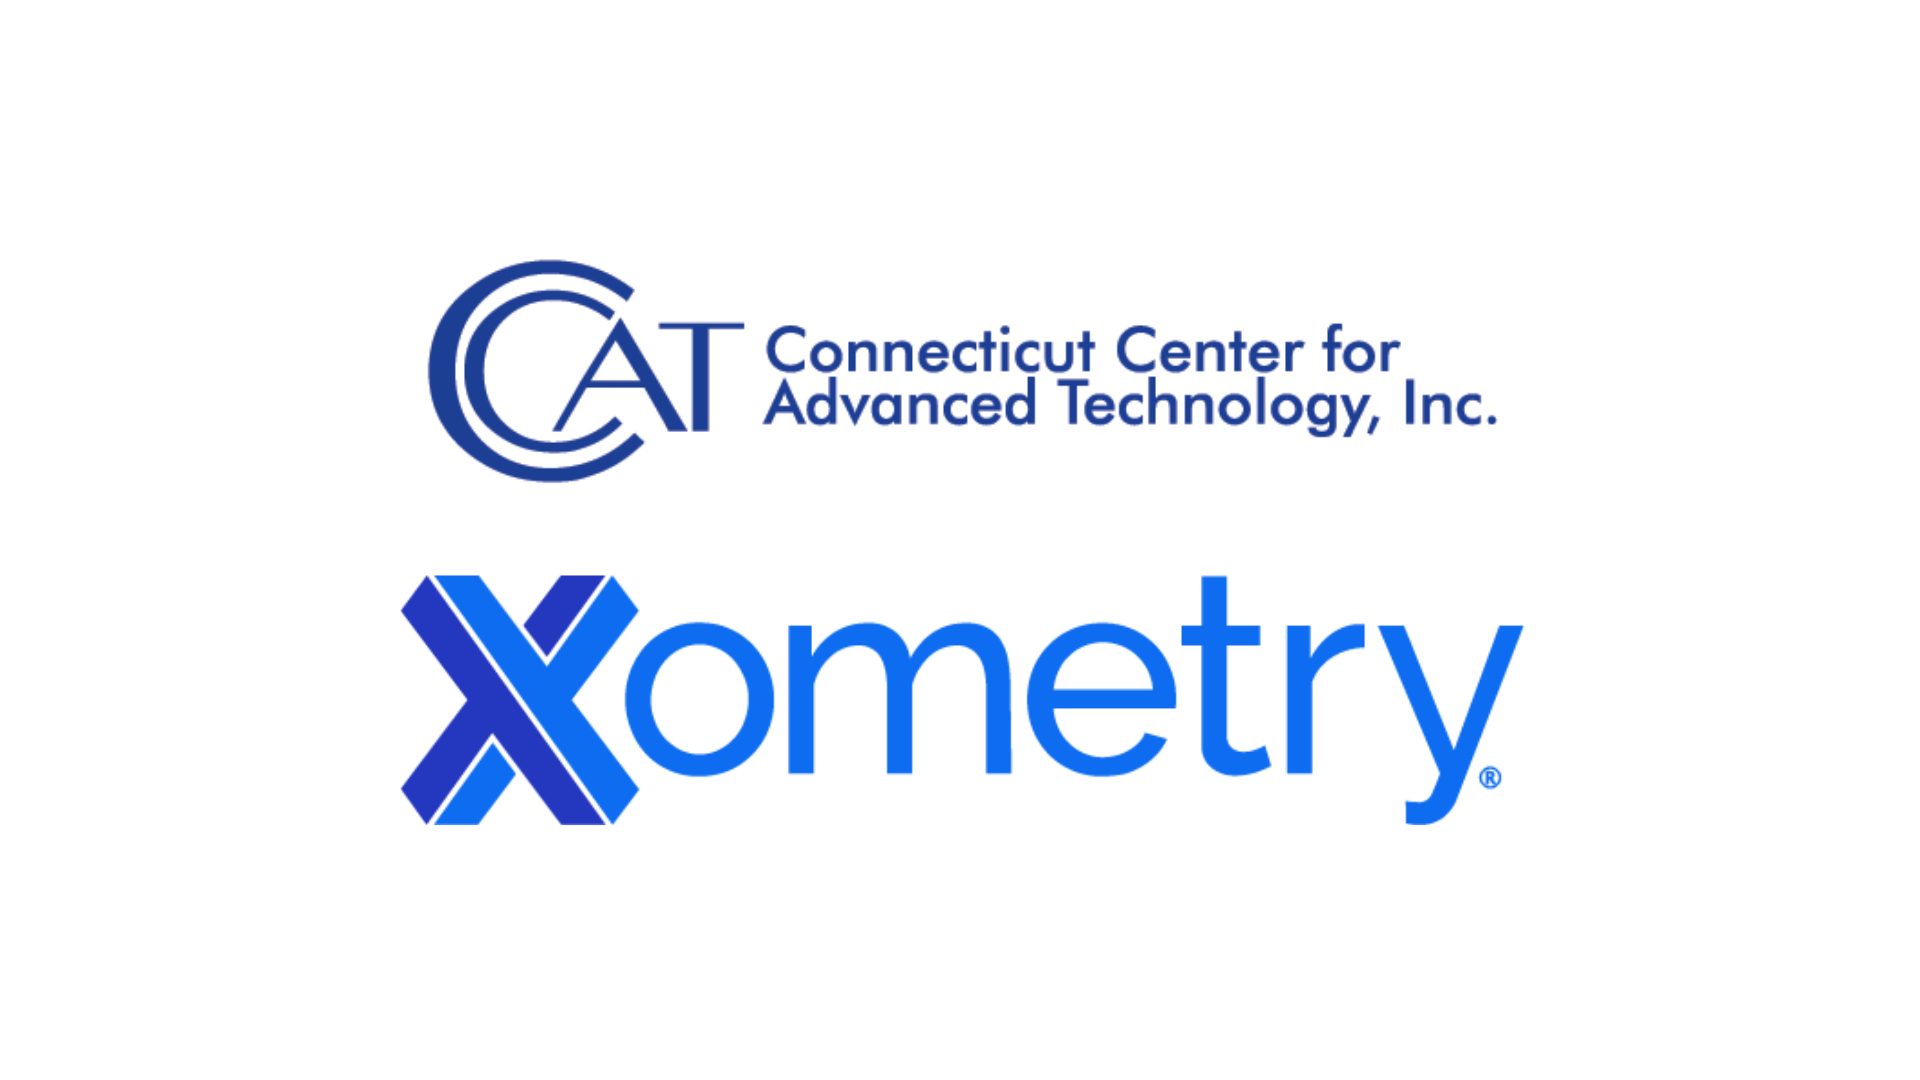 CCAT and community colleges will announce Xometry’s donation of scholarships for the next generation of skilled machinists, technicians and engineers.